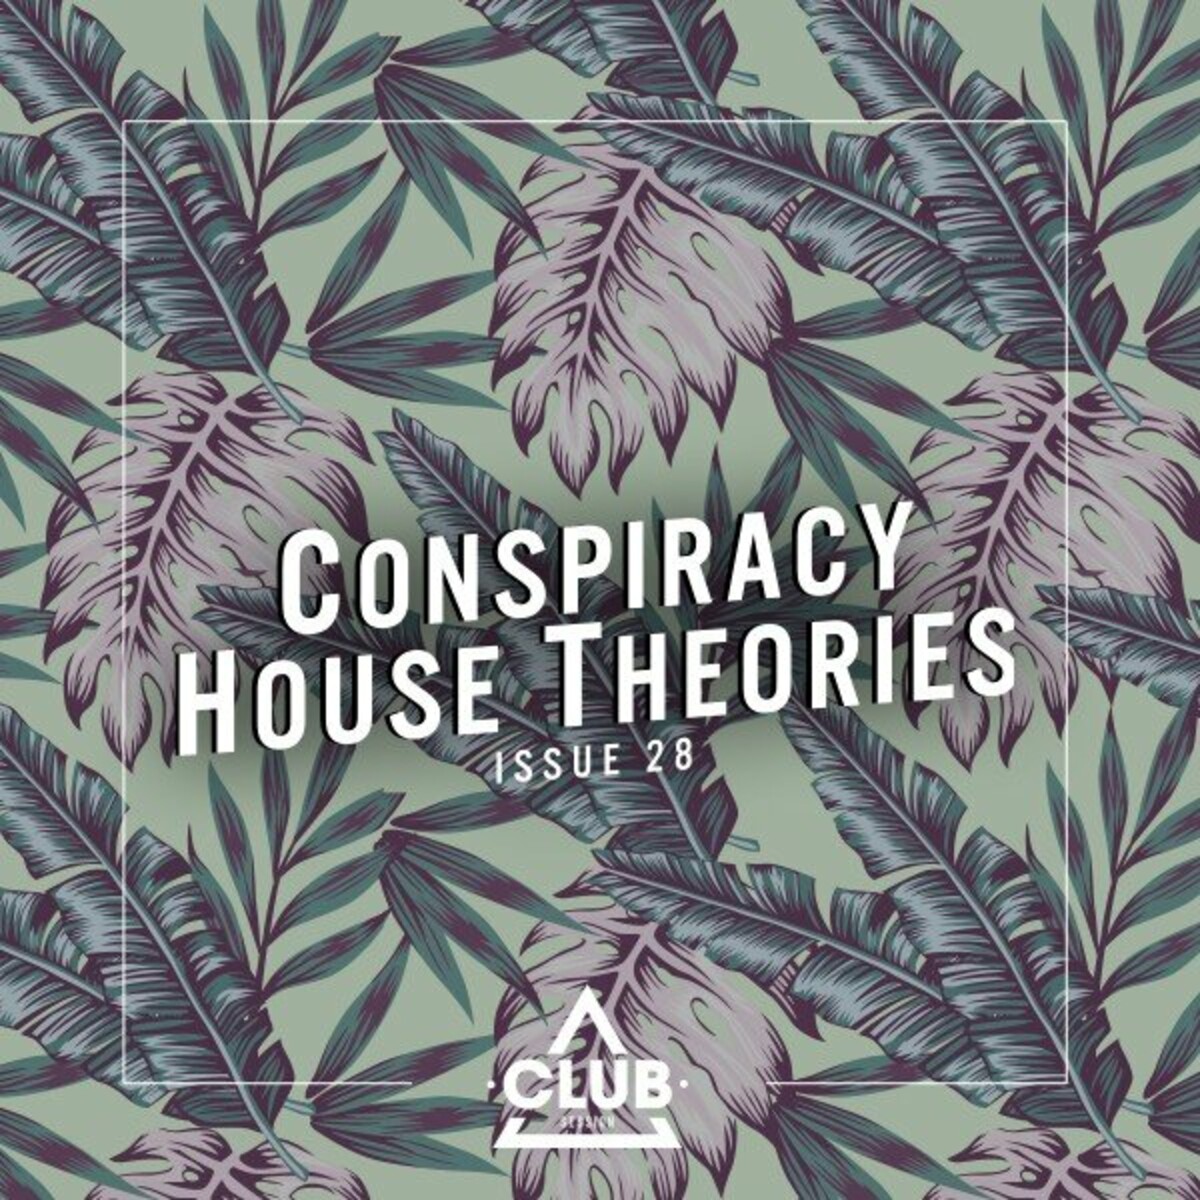 VA - Conspiracy House Theories, Issue 28 [CSCOMP3093]